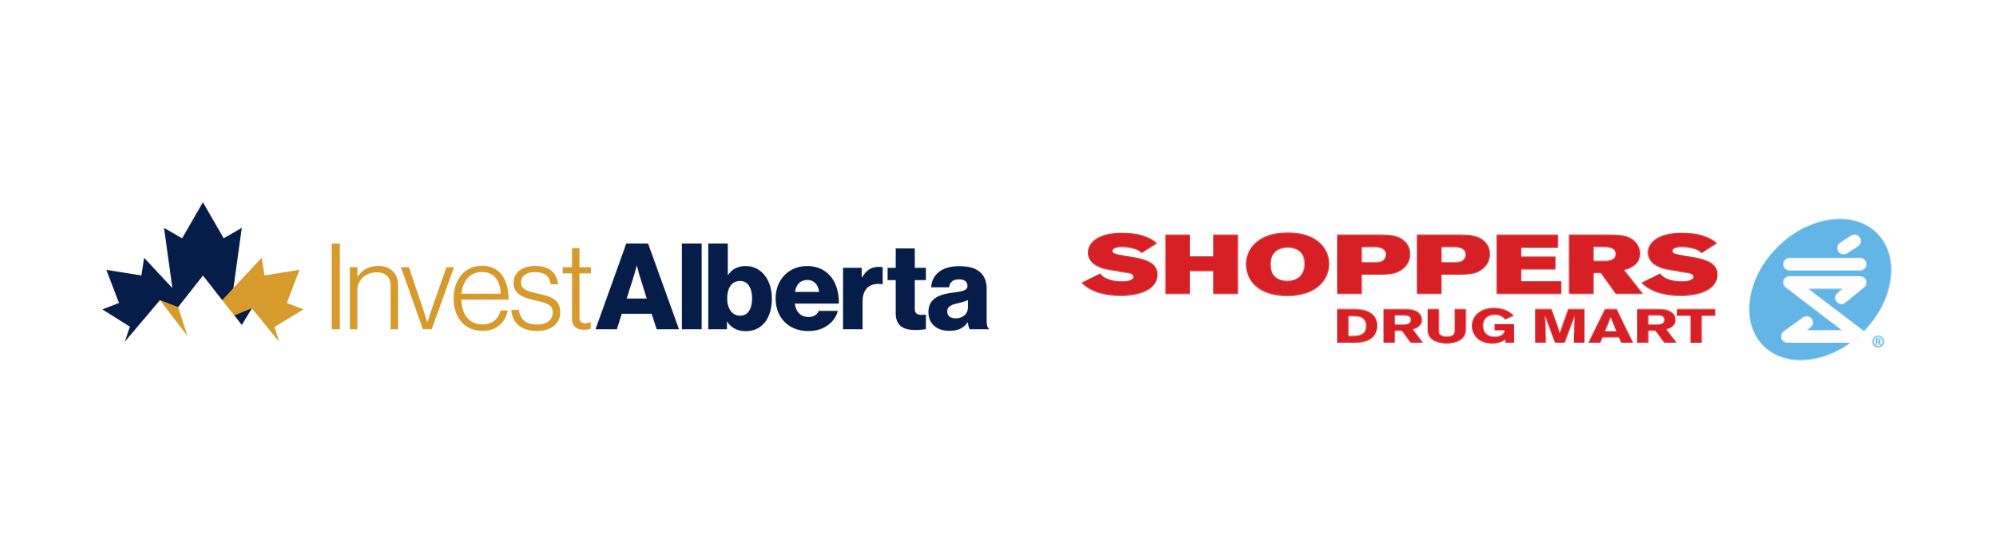 Announced today': Changes coming to Shoppers Drug Mart that will